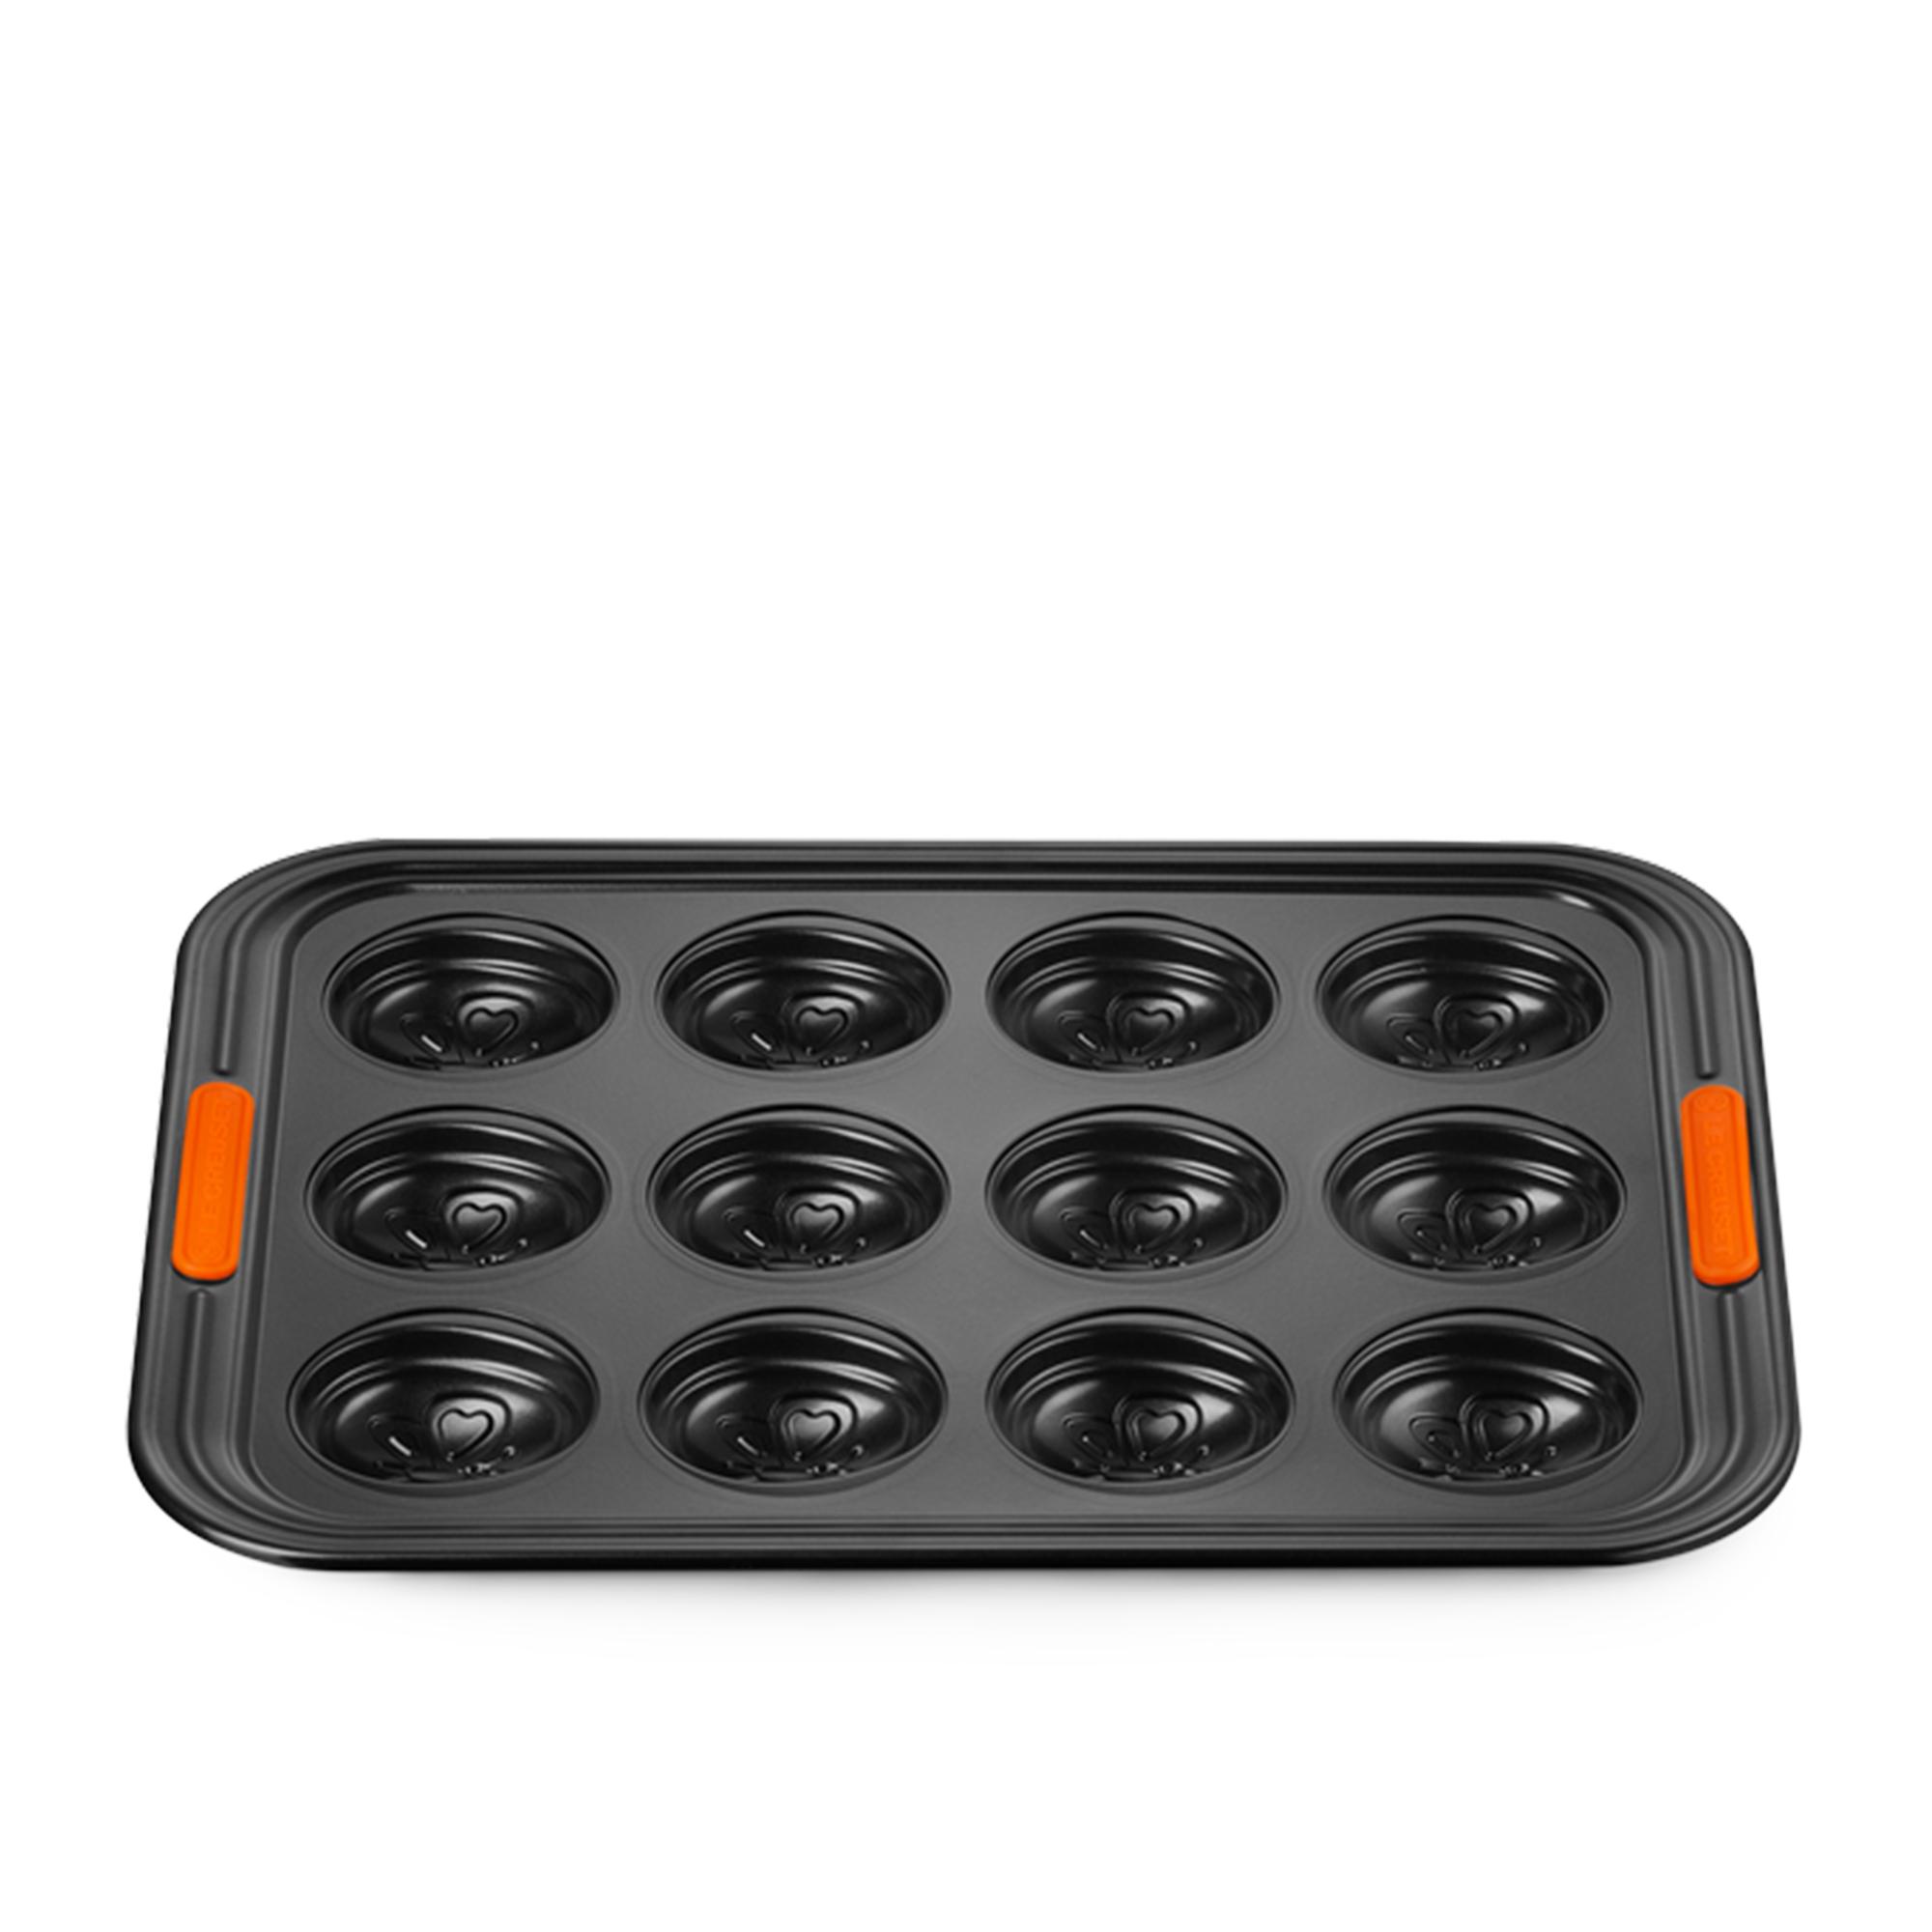 Le Creuset Toughened Non Stick Easter Egg Tray 12 Cup Image 4